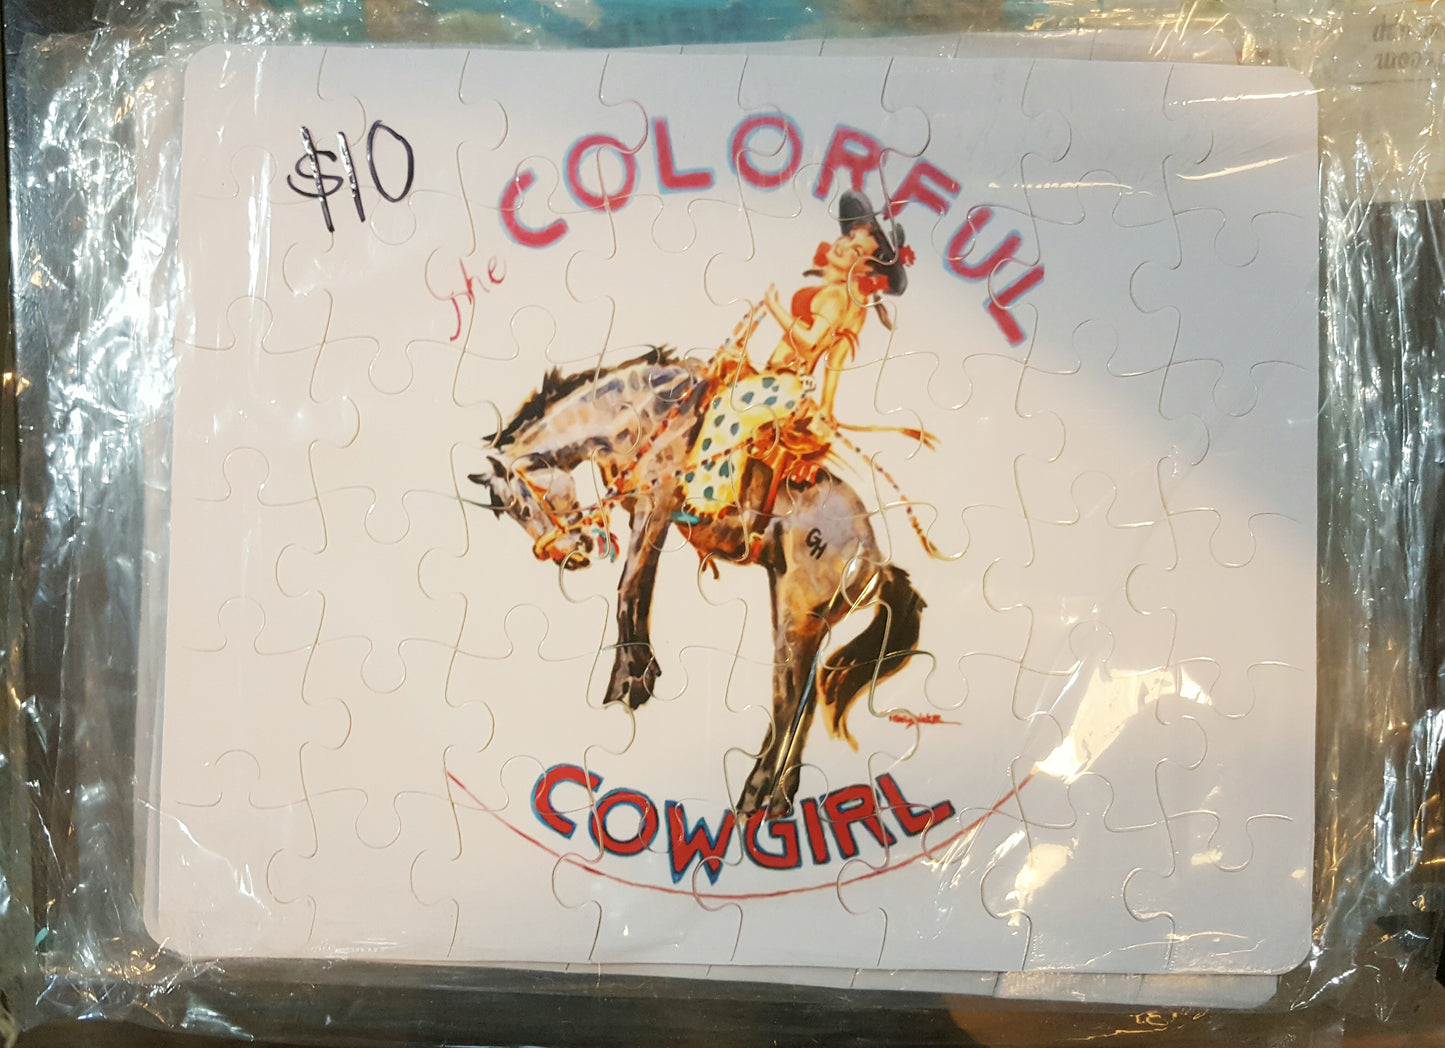 Colorful Cowgirl logo puzzle